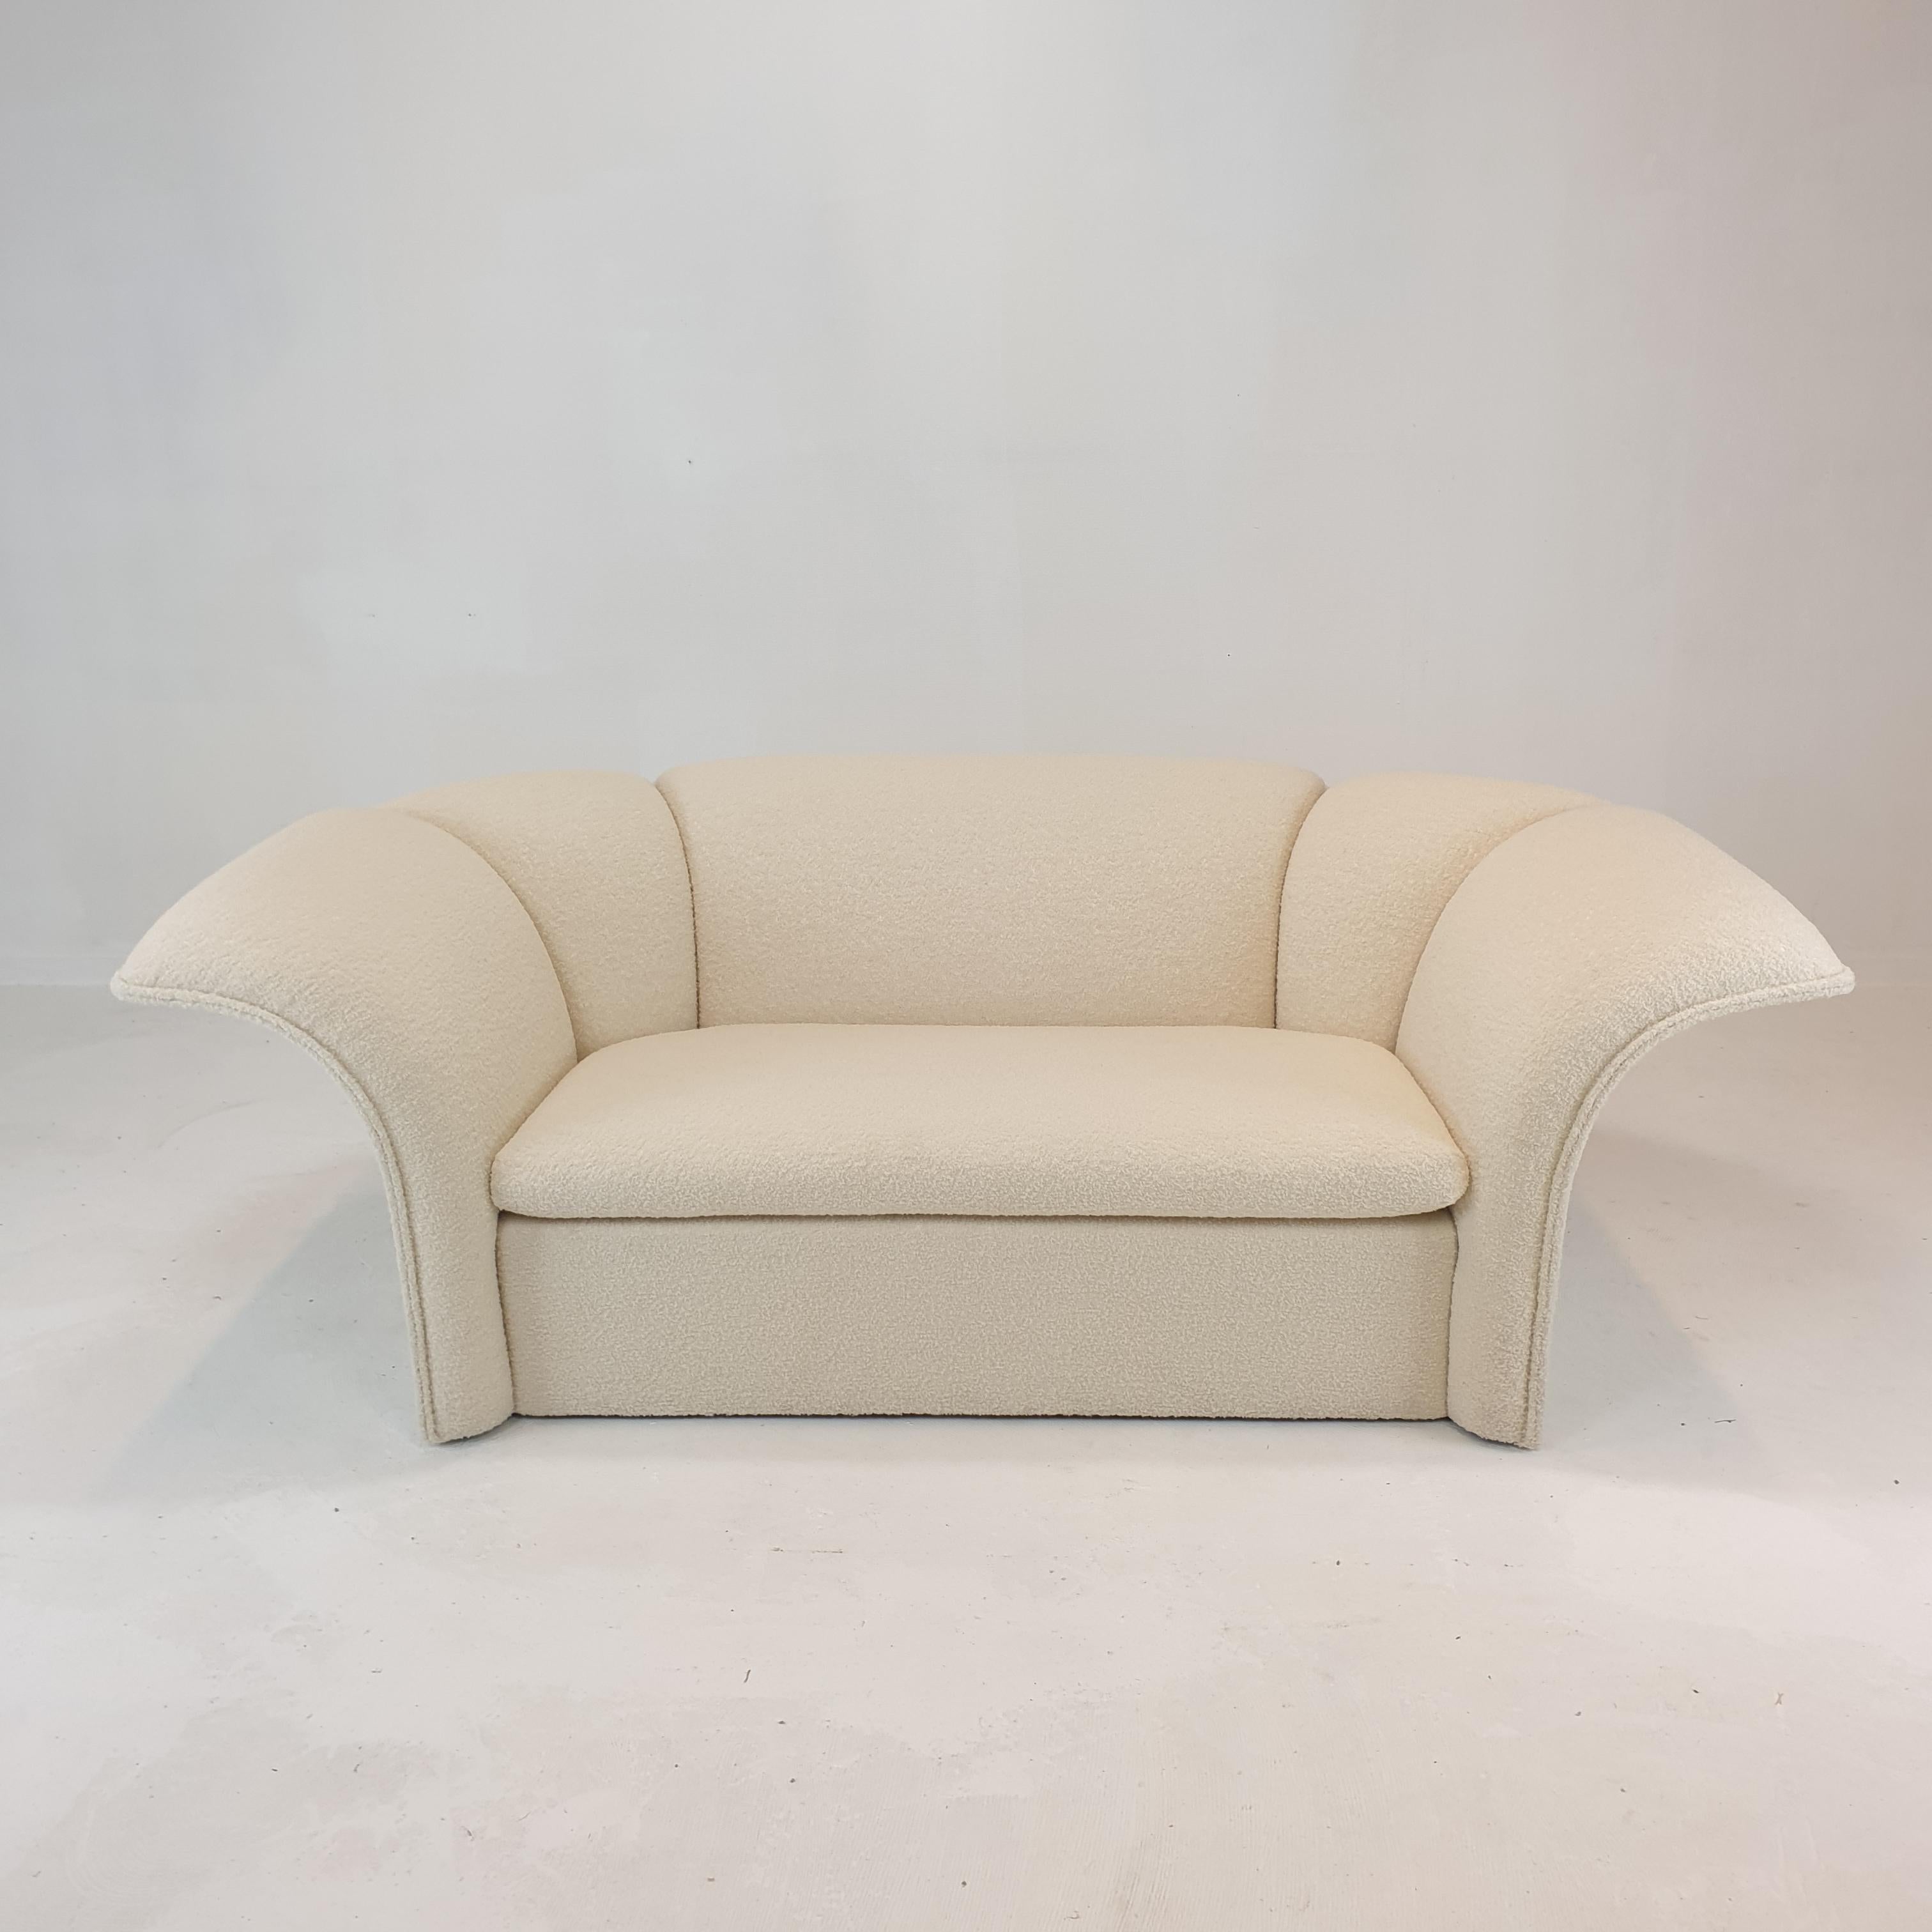 Magnificent 2-seat sofa, designed by the Artifort Design Group in the 70's.
This extremely rare sofa is lovely shaped with curved armrests and a curved back.

Super cosy and comfortable seat combined with the soft fabric.
This stunning sofa is